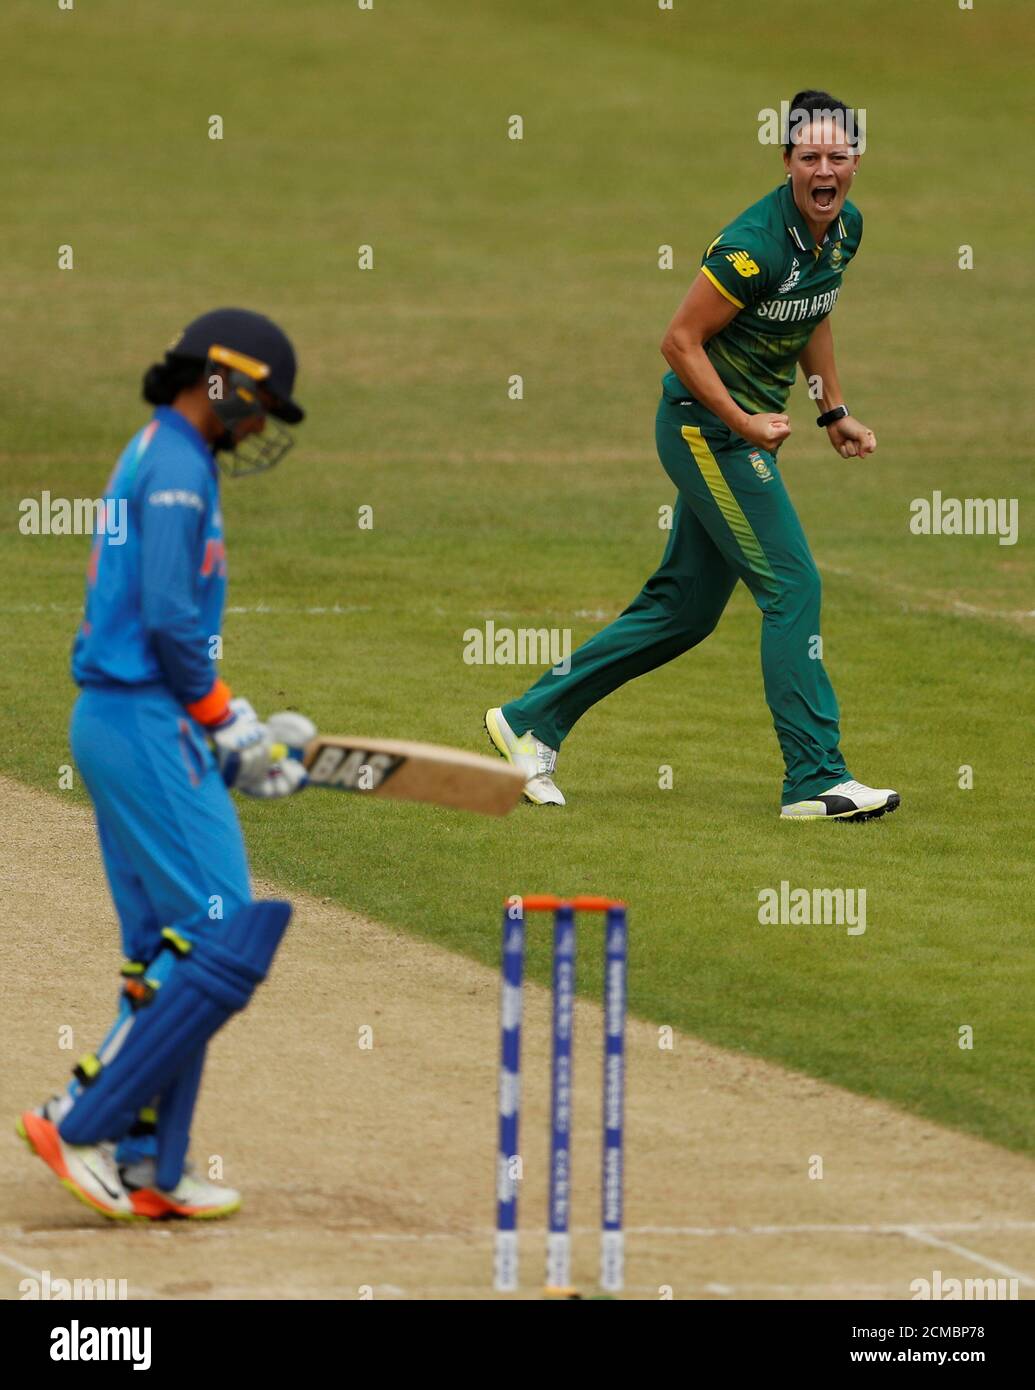 Cricket - South Africa vs India - Women's Cricket World Cup - Leicester, Britain - July 8, 2017   South Africa's Marizanne Kapp celebrates the wicket of India's Smriti Mandhana   Action Images via Reuters/Lee Smith Stock Photo